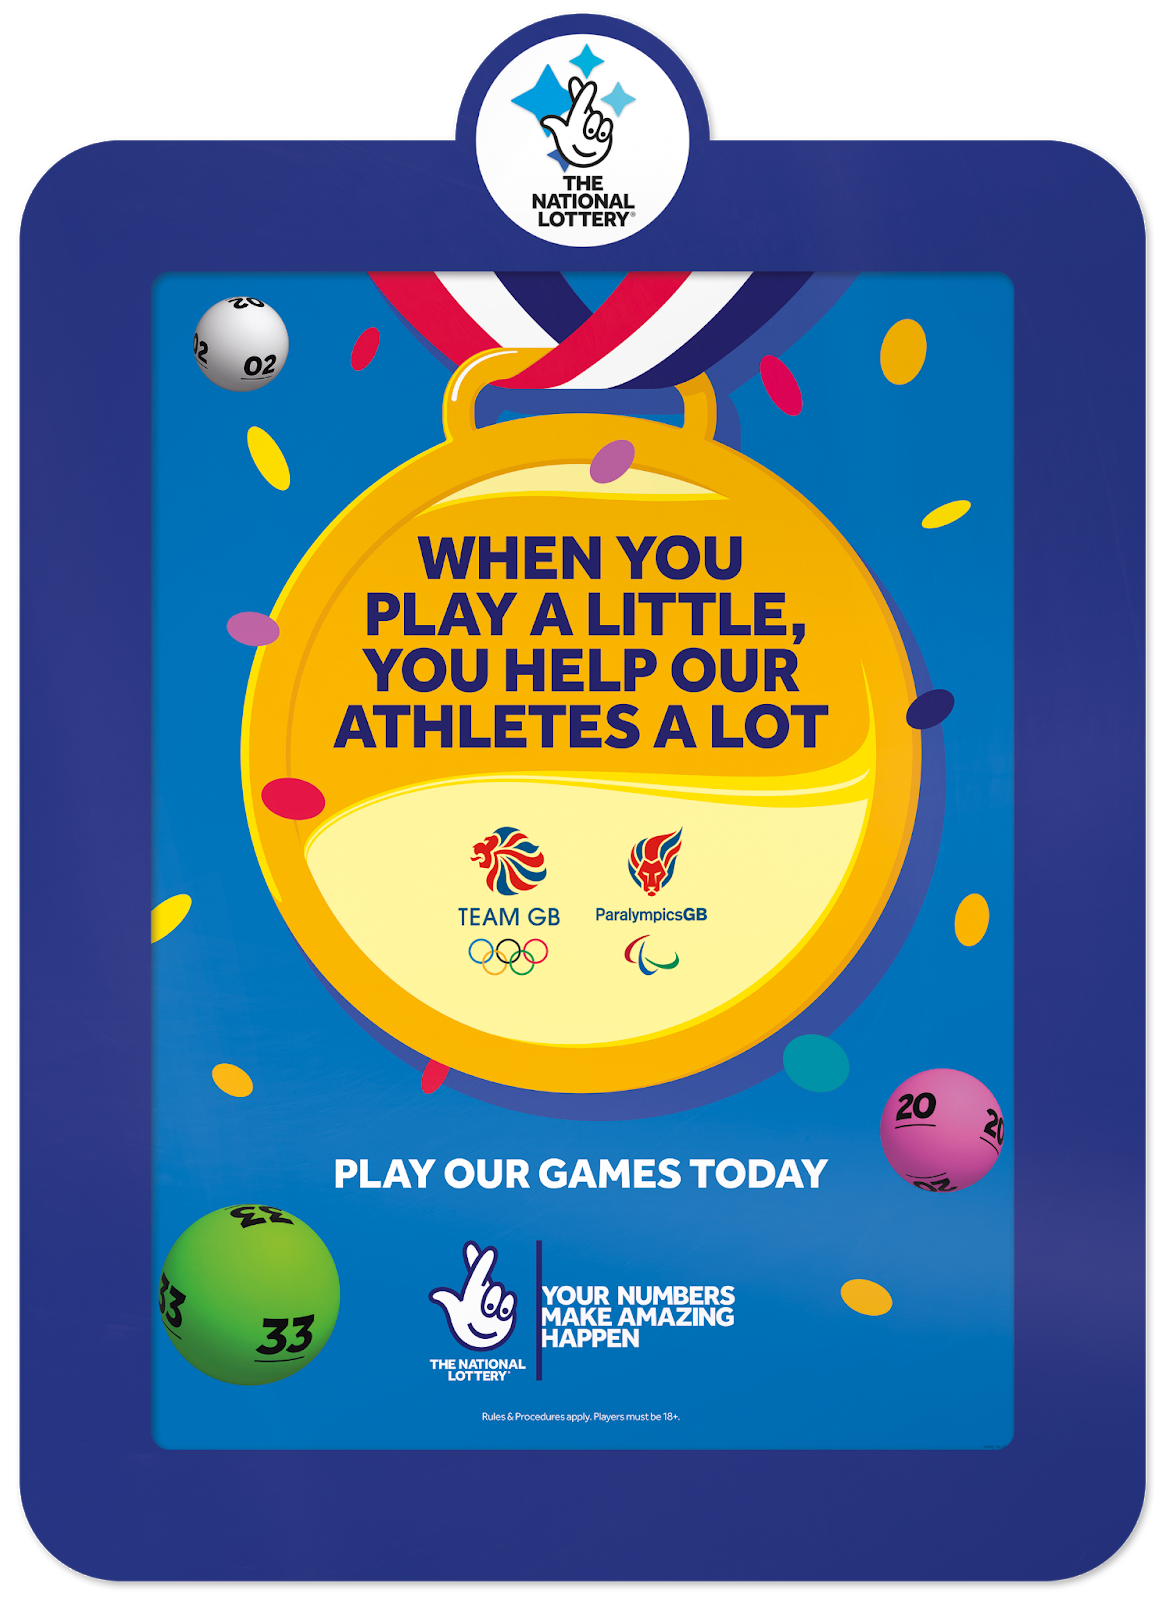 Camelot launches huge new national lottery campaign to highlight Team GB support